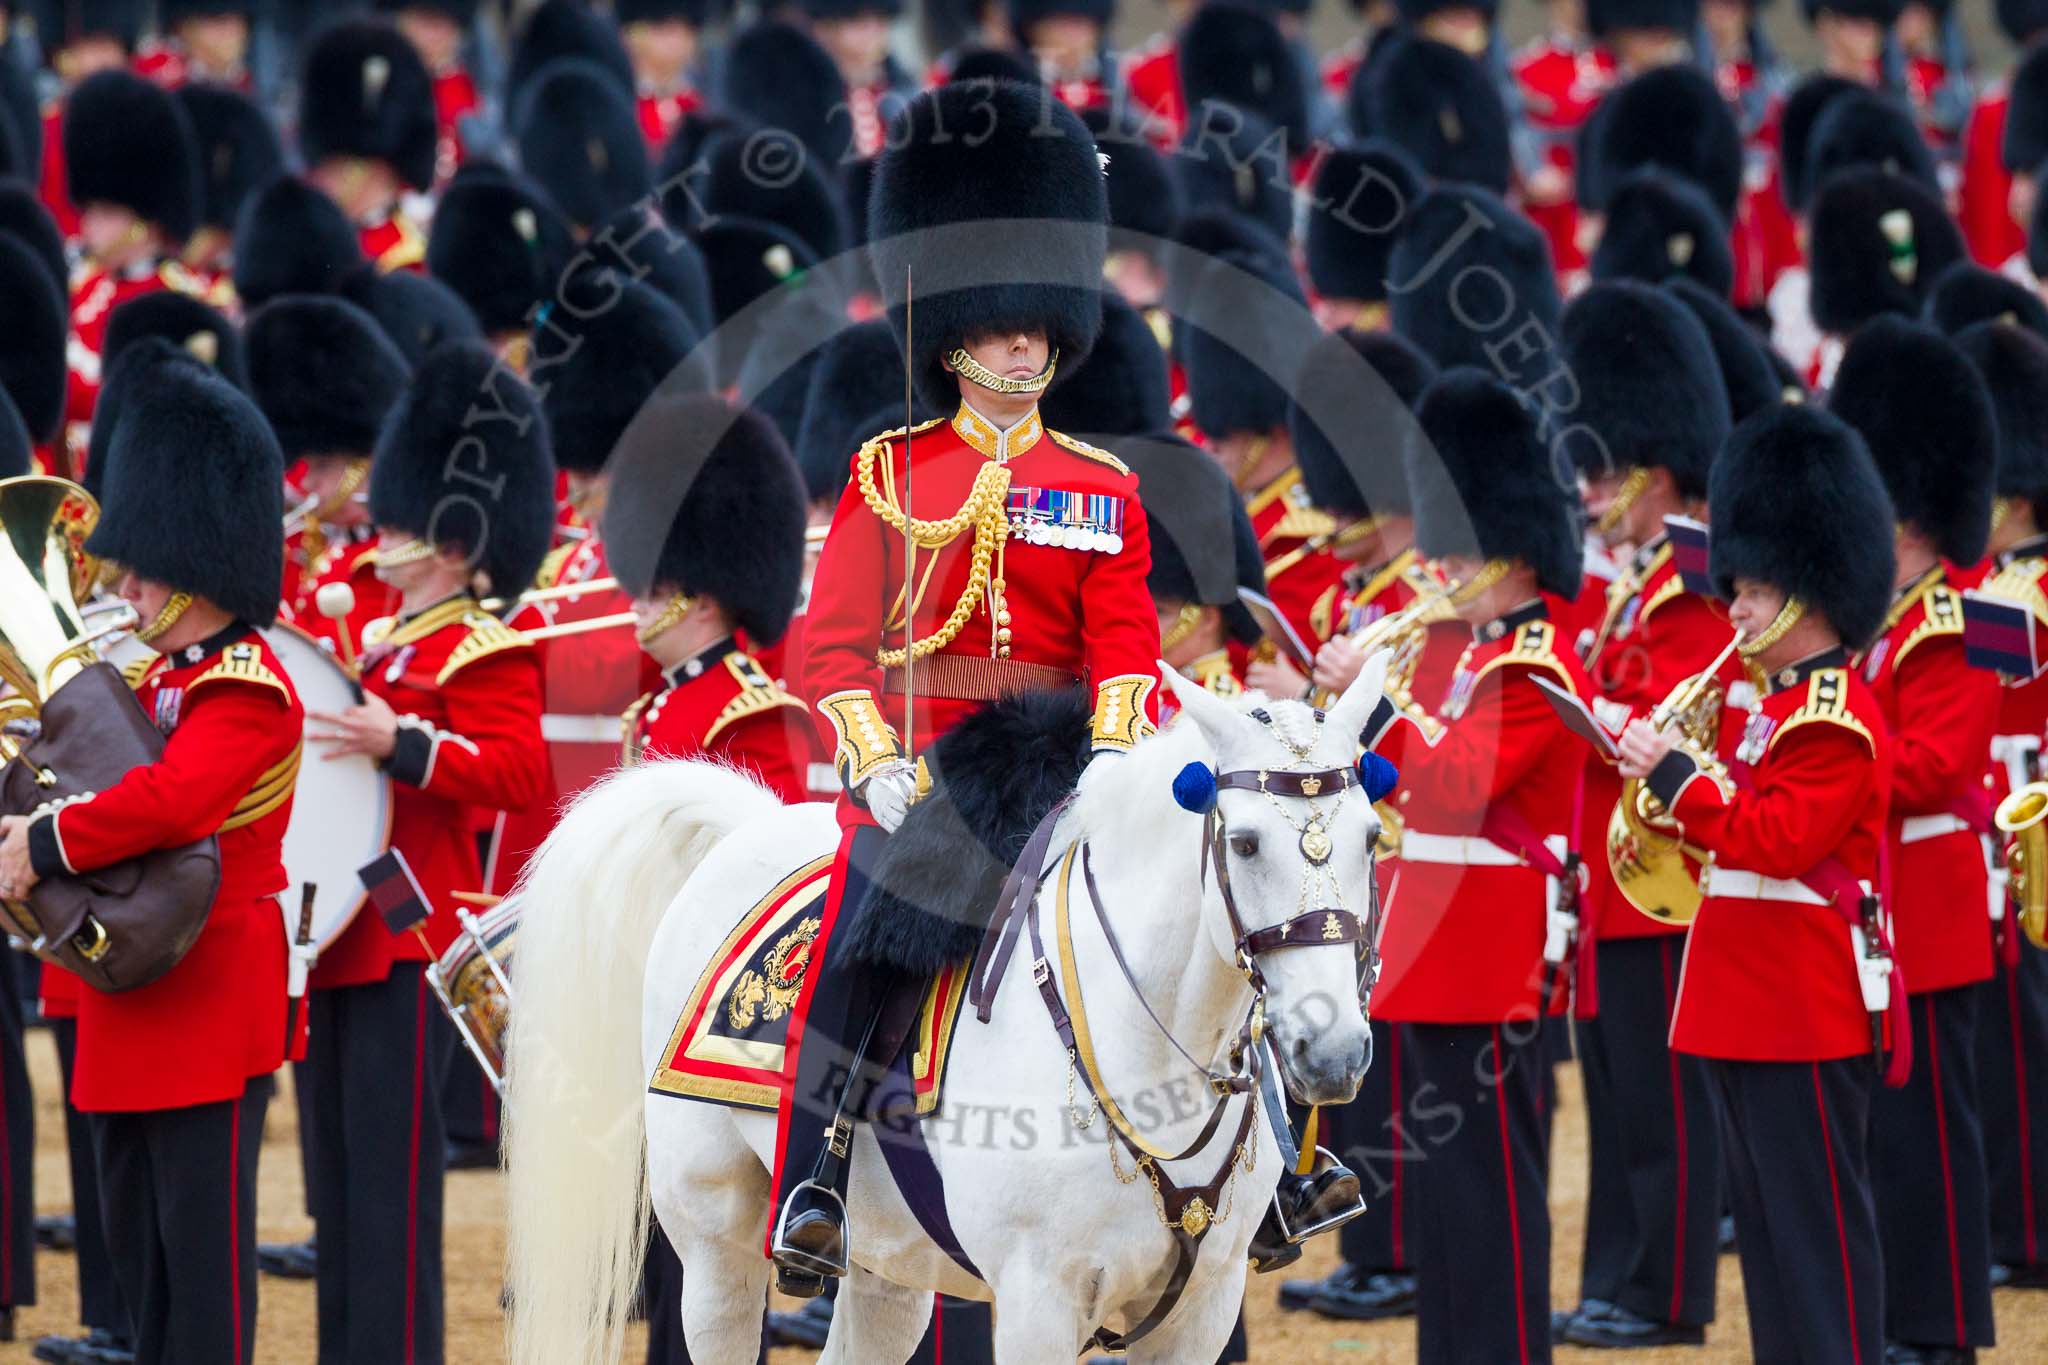 Trooping the Colour 2015. Image #402, 13 June 2015 11:24 Horse Guards Parade, London, UK